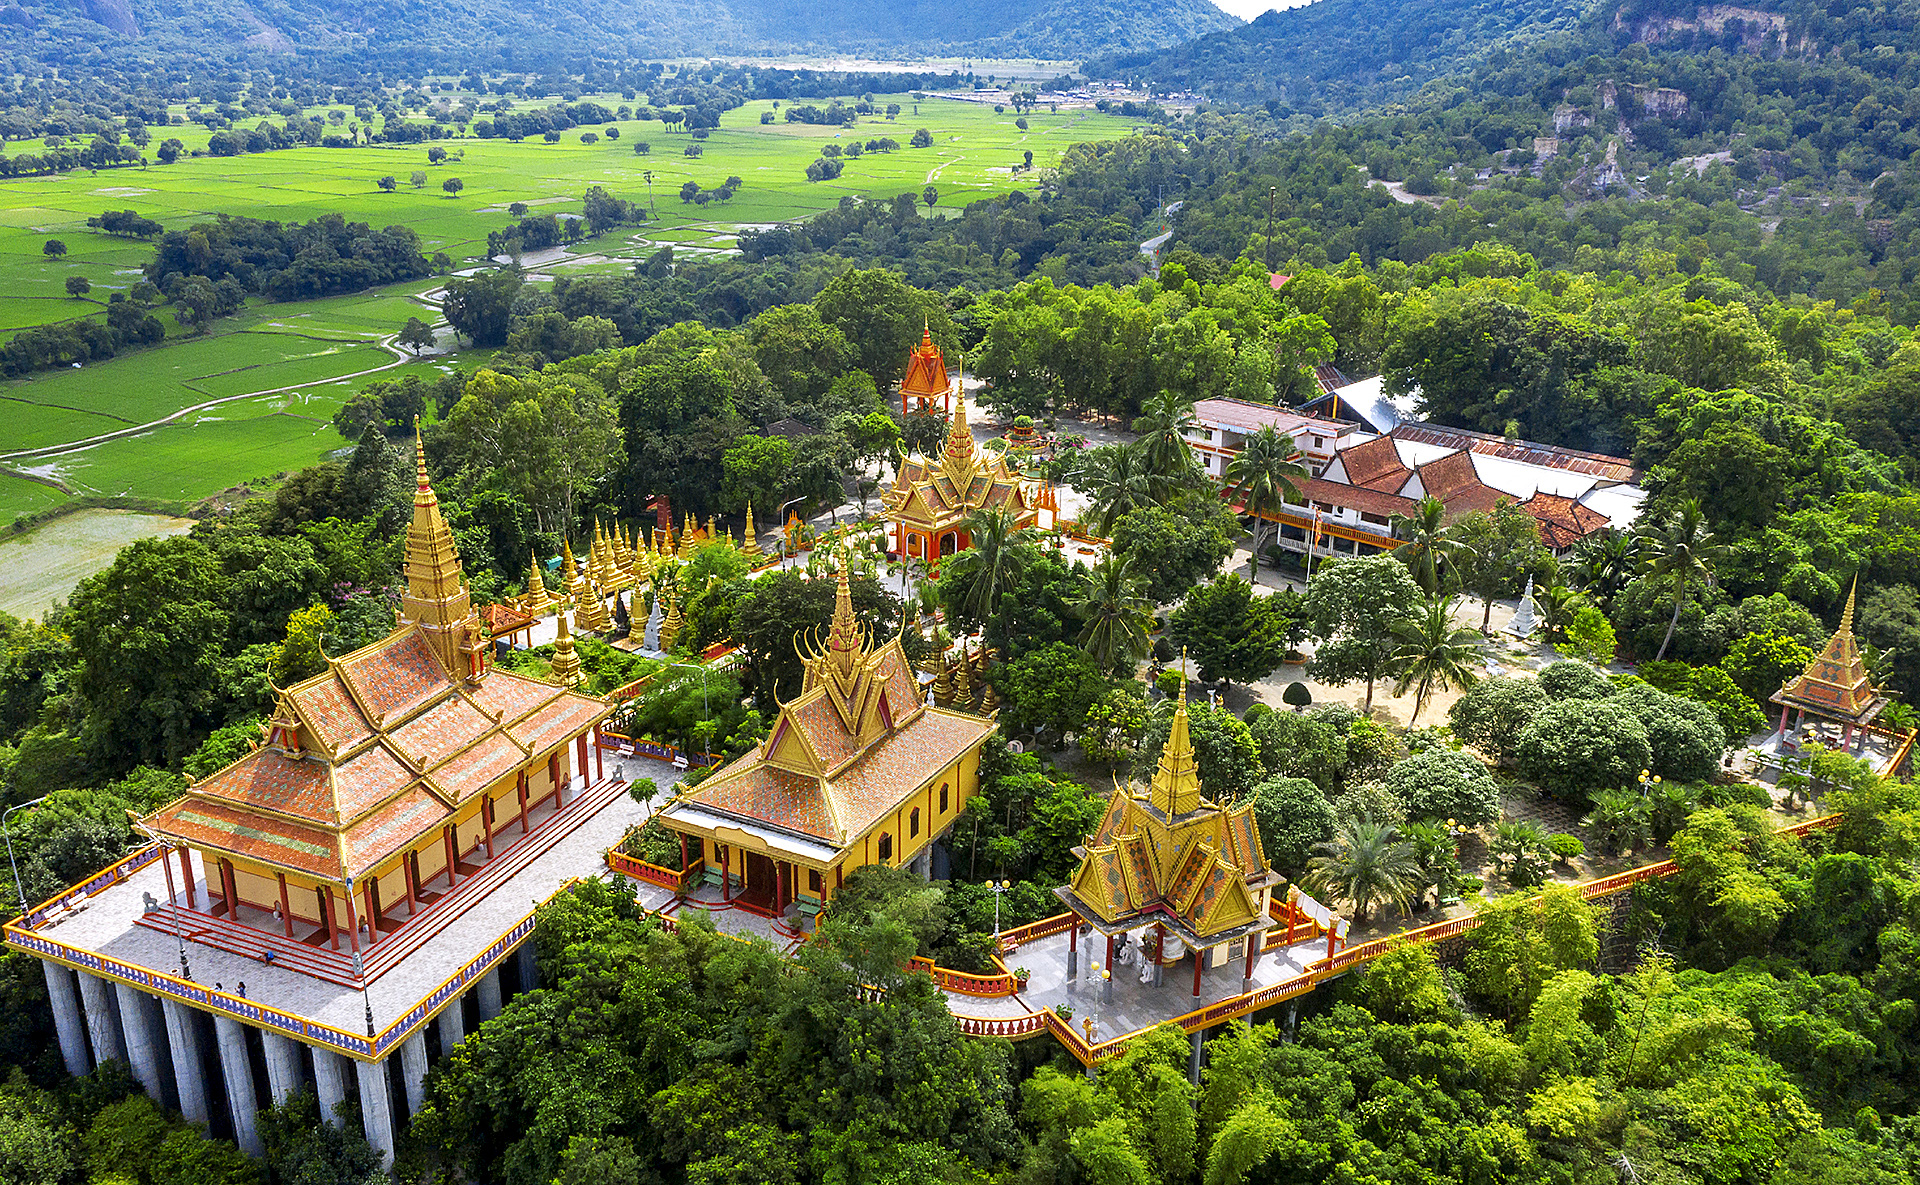 The unique architecture of the Khmer ethnic group’s pagodas and towers in the Bay Nui region. Photo: An Giang Department of Culture, Sports and Tourism